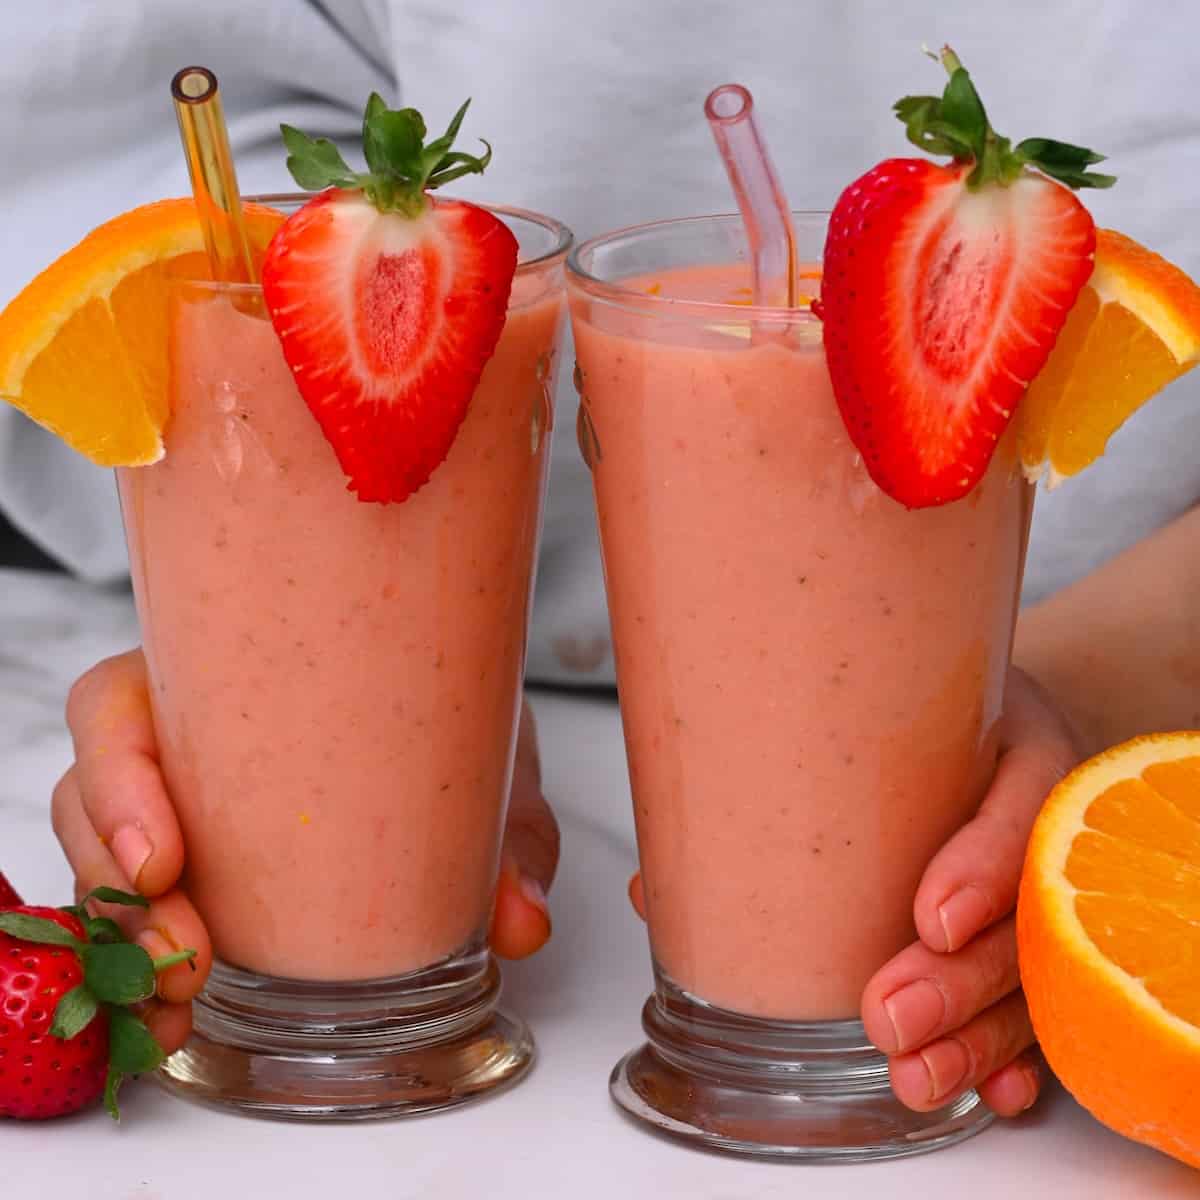 3-Ingredient Strawberry Banana Smoothie - Alphafoodie